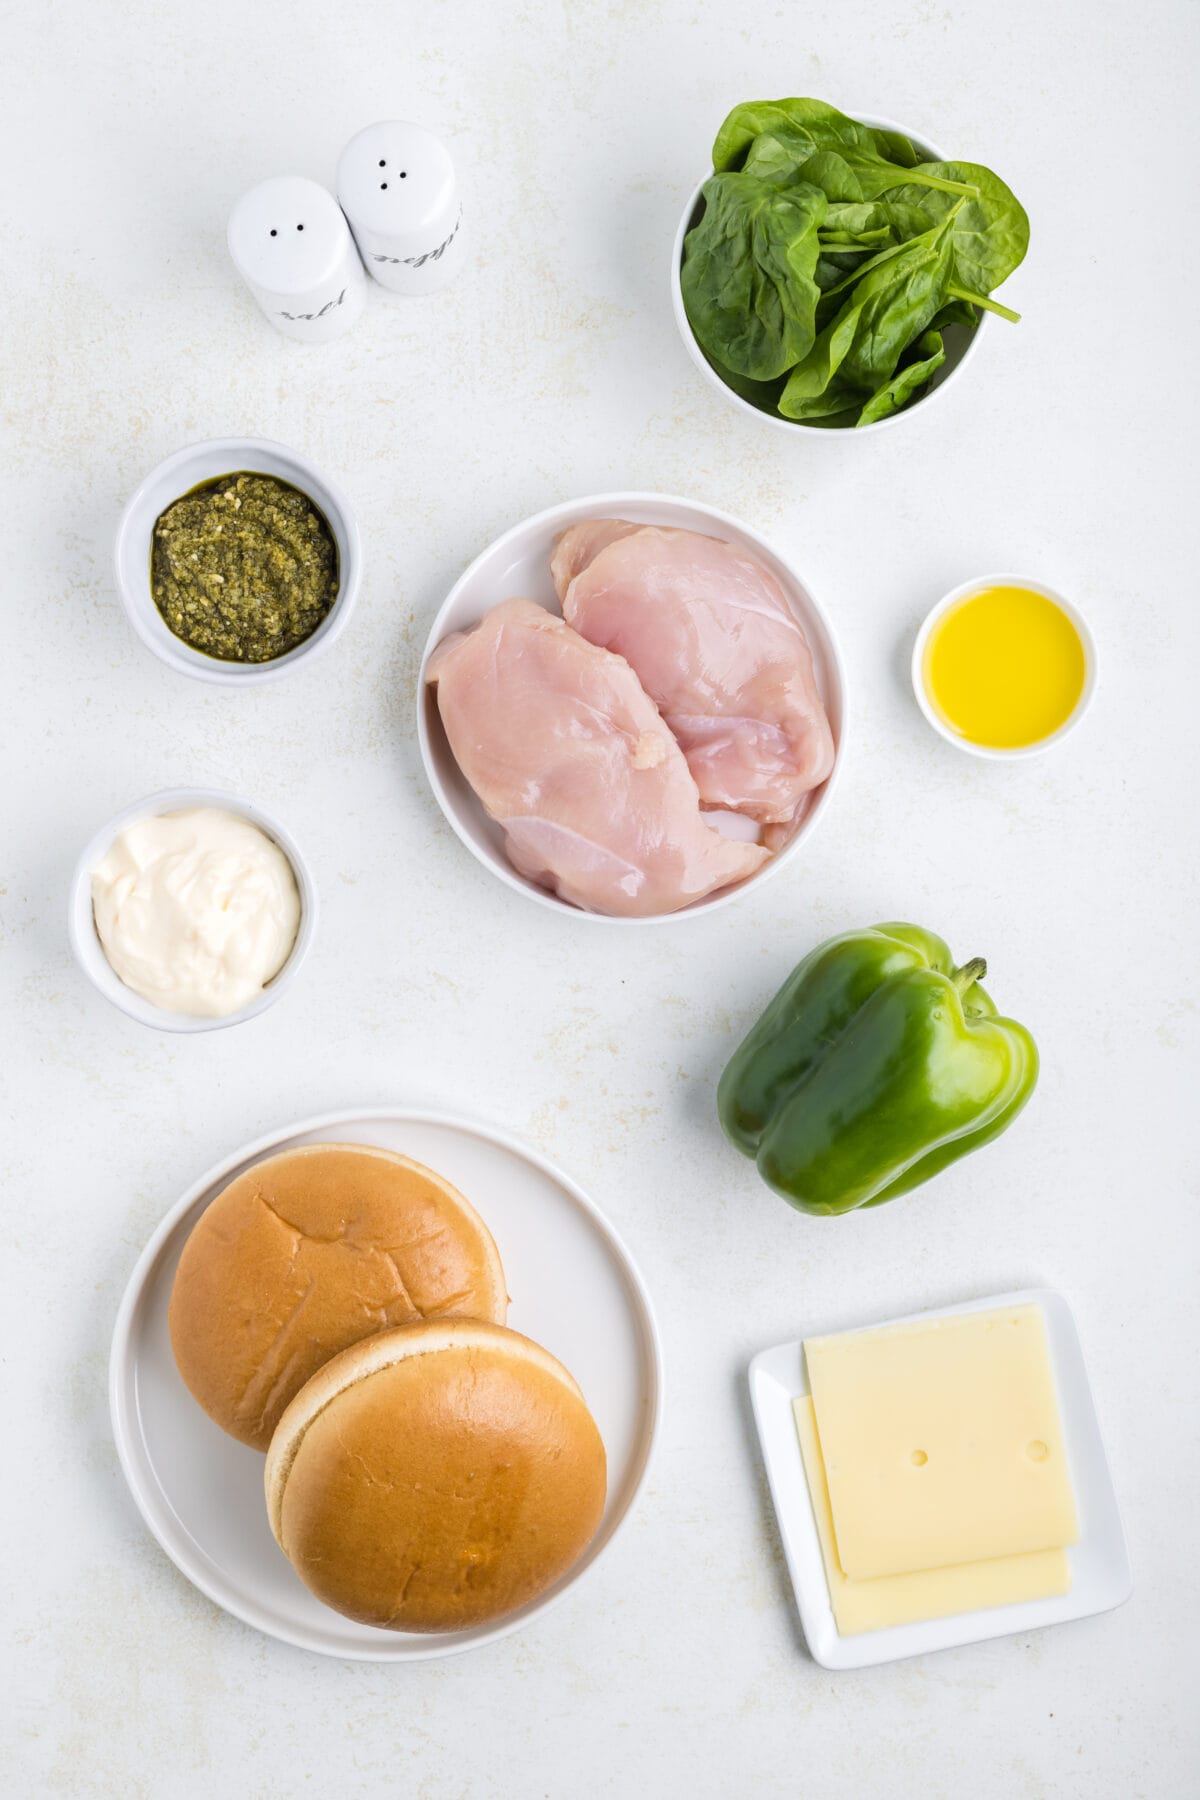 Ingredients used for the grilled chicken sandwich with pesto may in small bowls and plates.